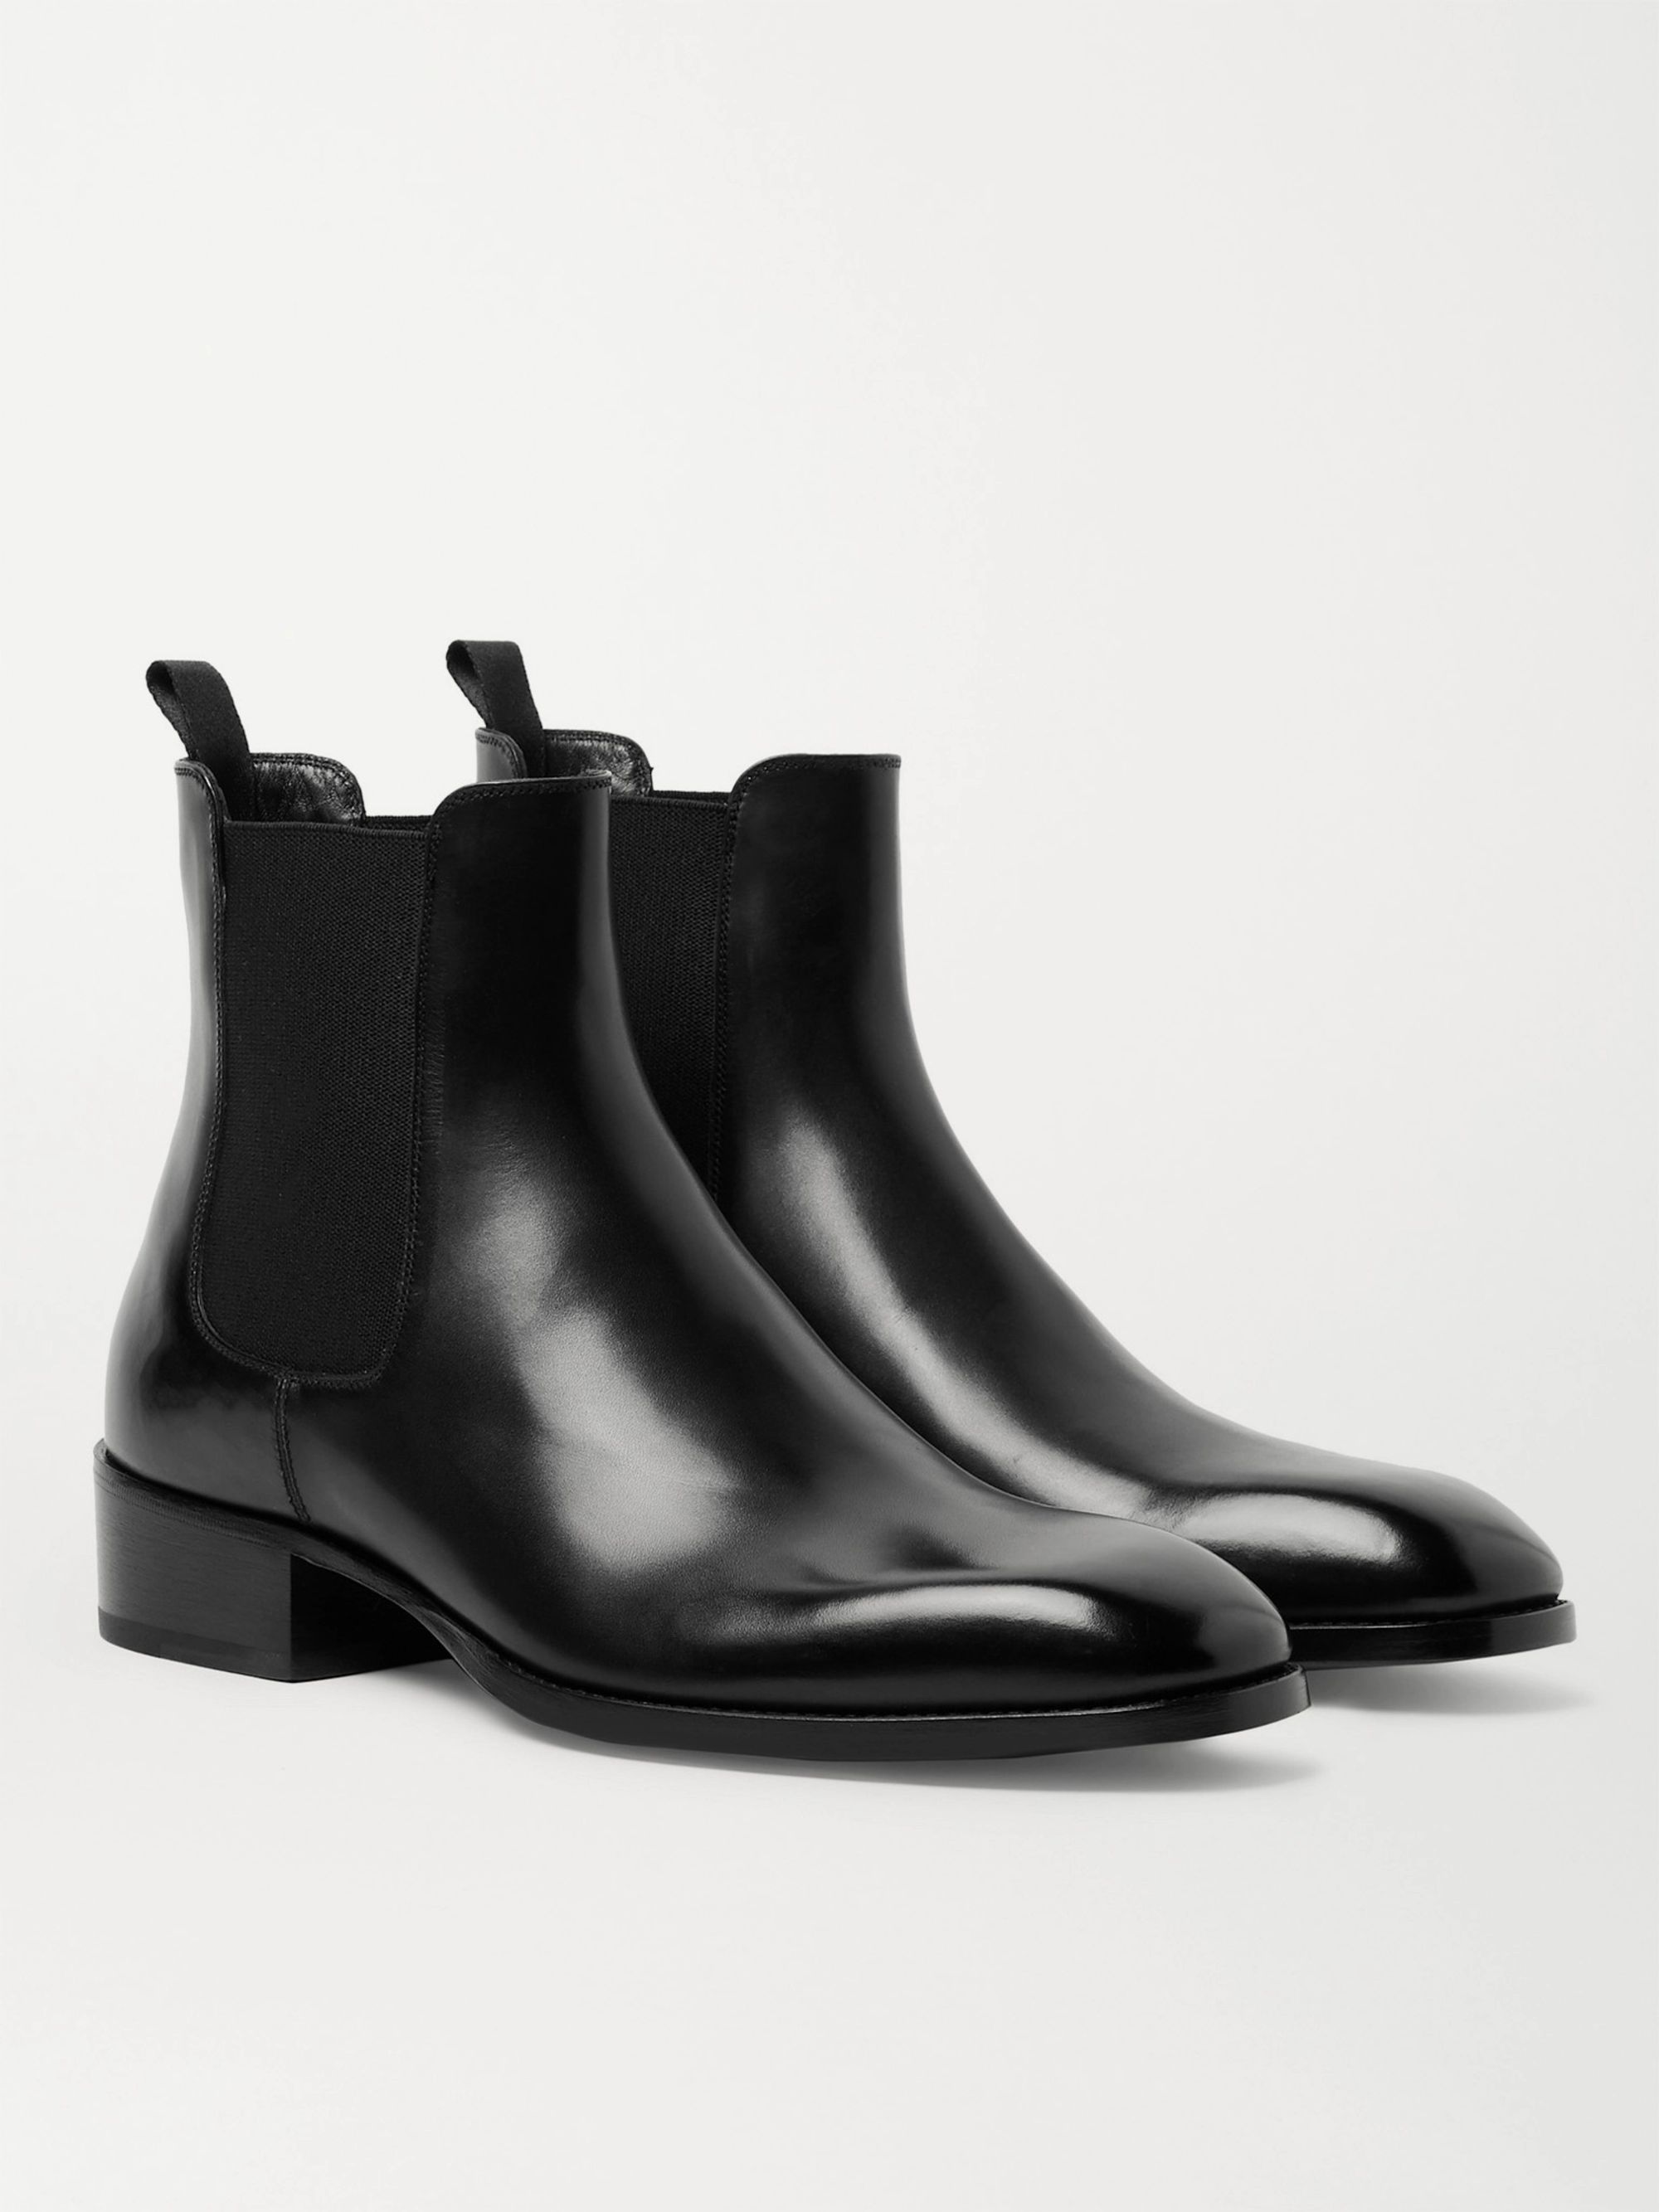 tom ford boots uk